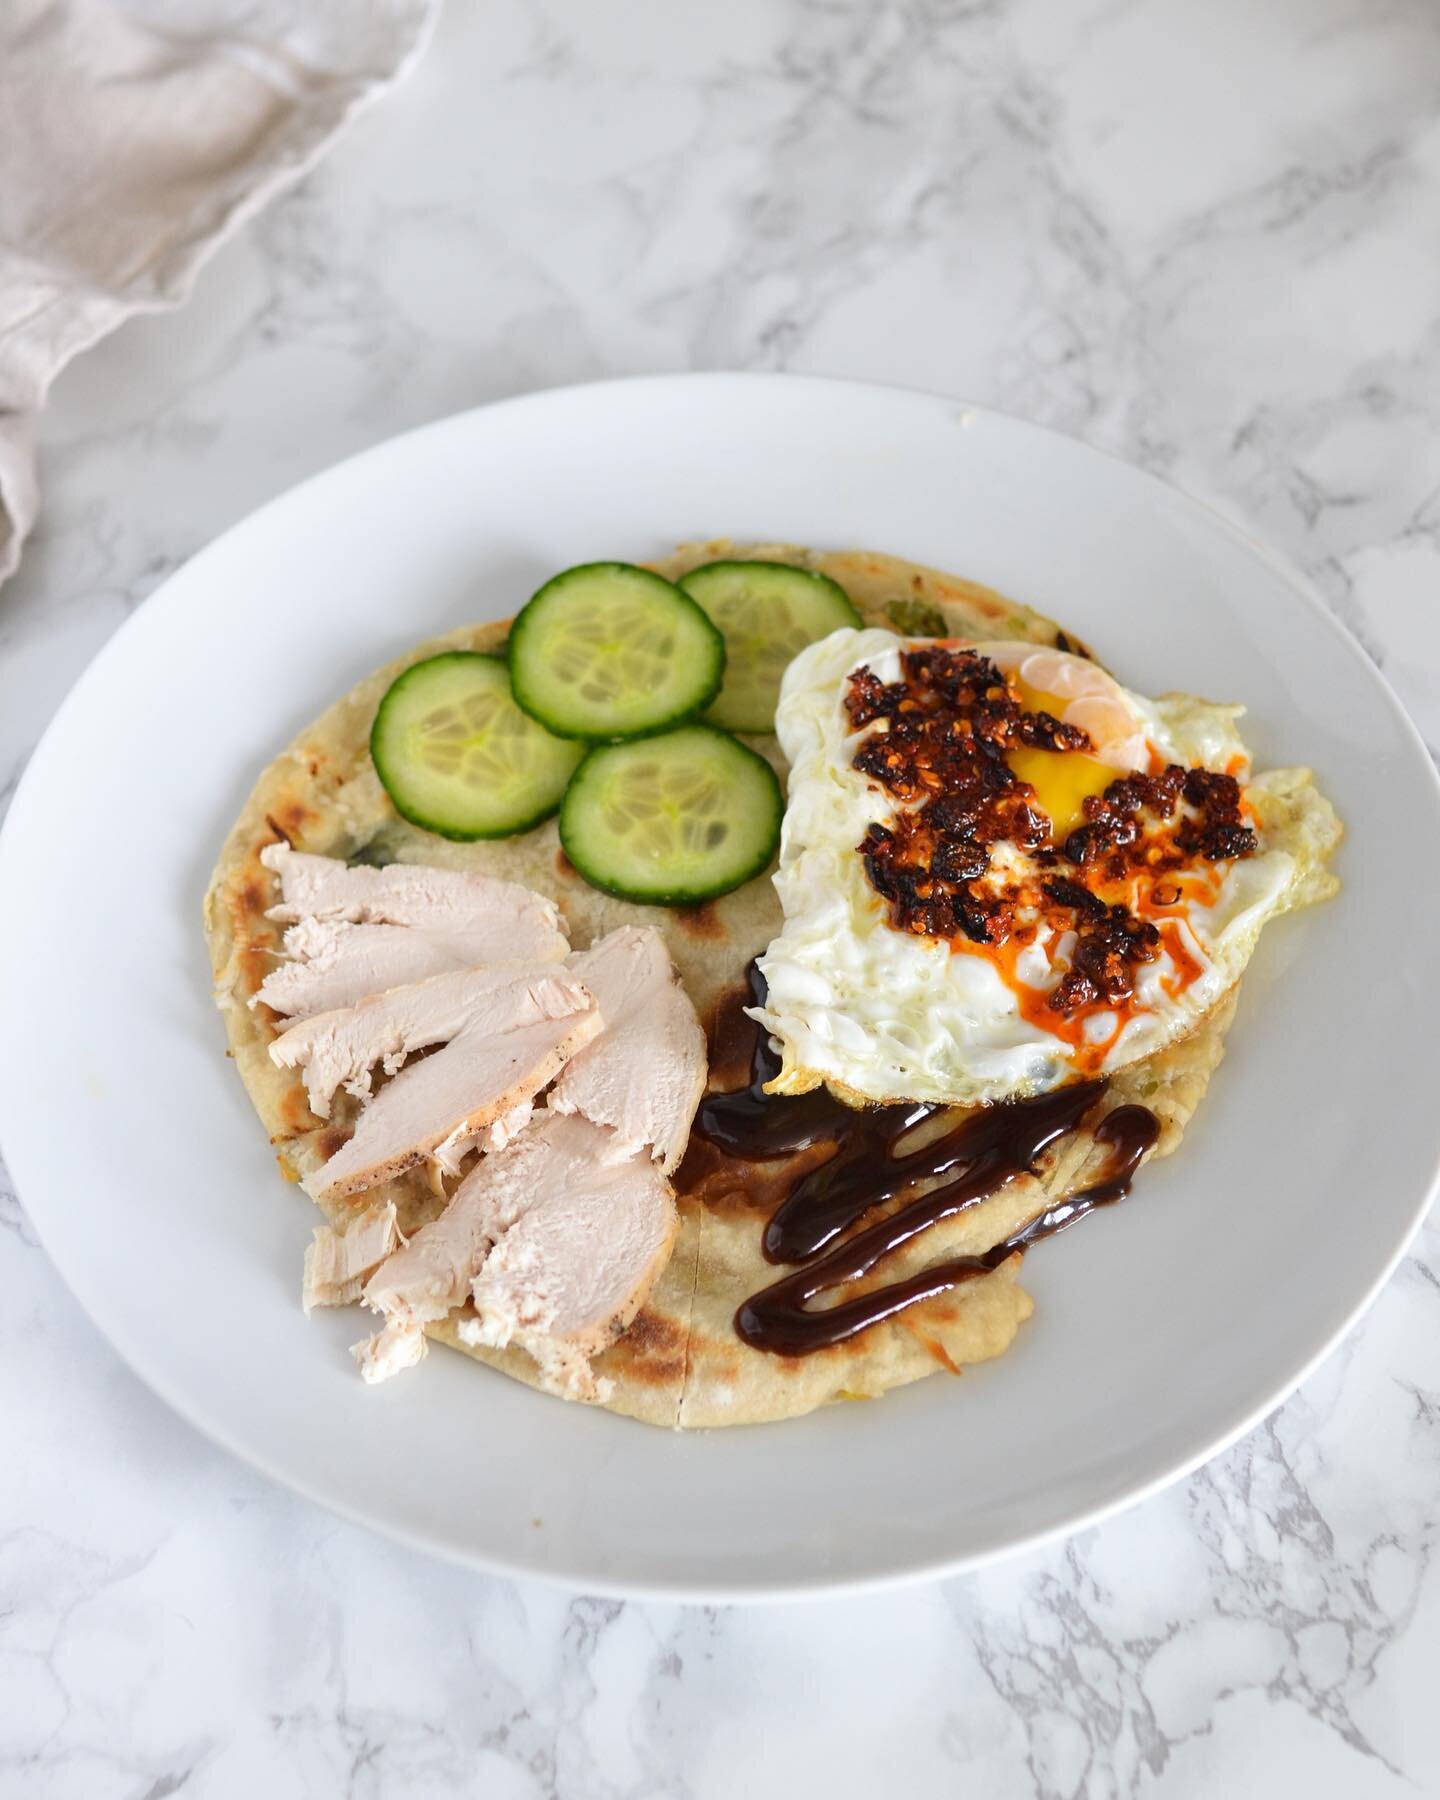 Tiktok made me do it 🙈 Tortilla hack inspired by @eatchofood 😍
Instead of a tortilla, I used a homemade spring onion pancake. I added leftover chicken, cucumber slices, a fried egg with chili crisp and hoisin sauce on the final quarter. 
Slice the 